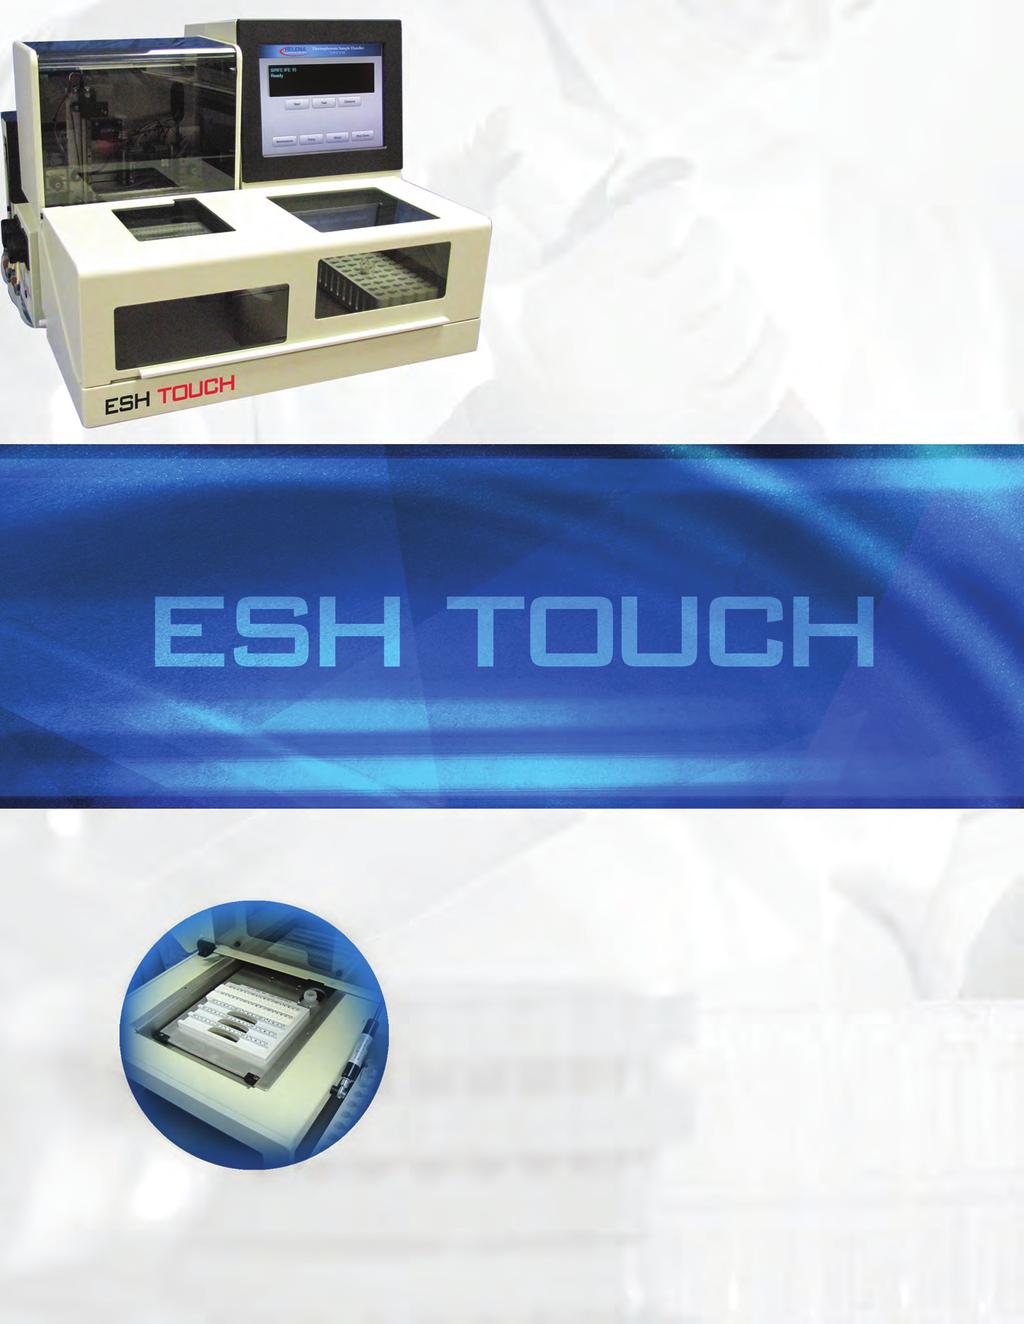 New! ESH Touch The next generation of Electrophoresis Sample Handler will soon join the Touch Series of analyzers as part of Helena s integrated solution for high volume electrophoresis workloads.